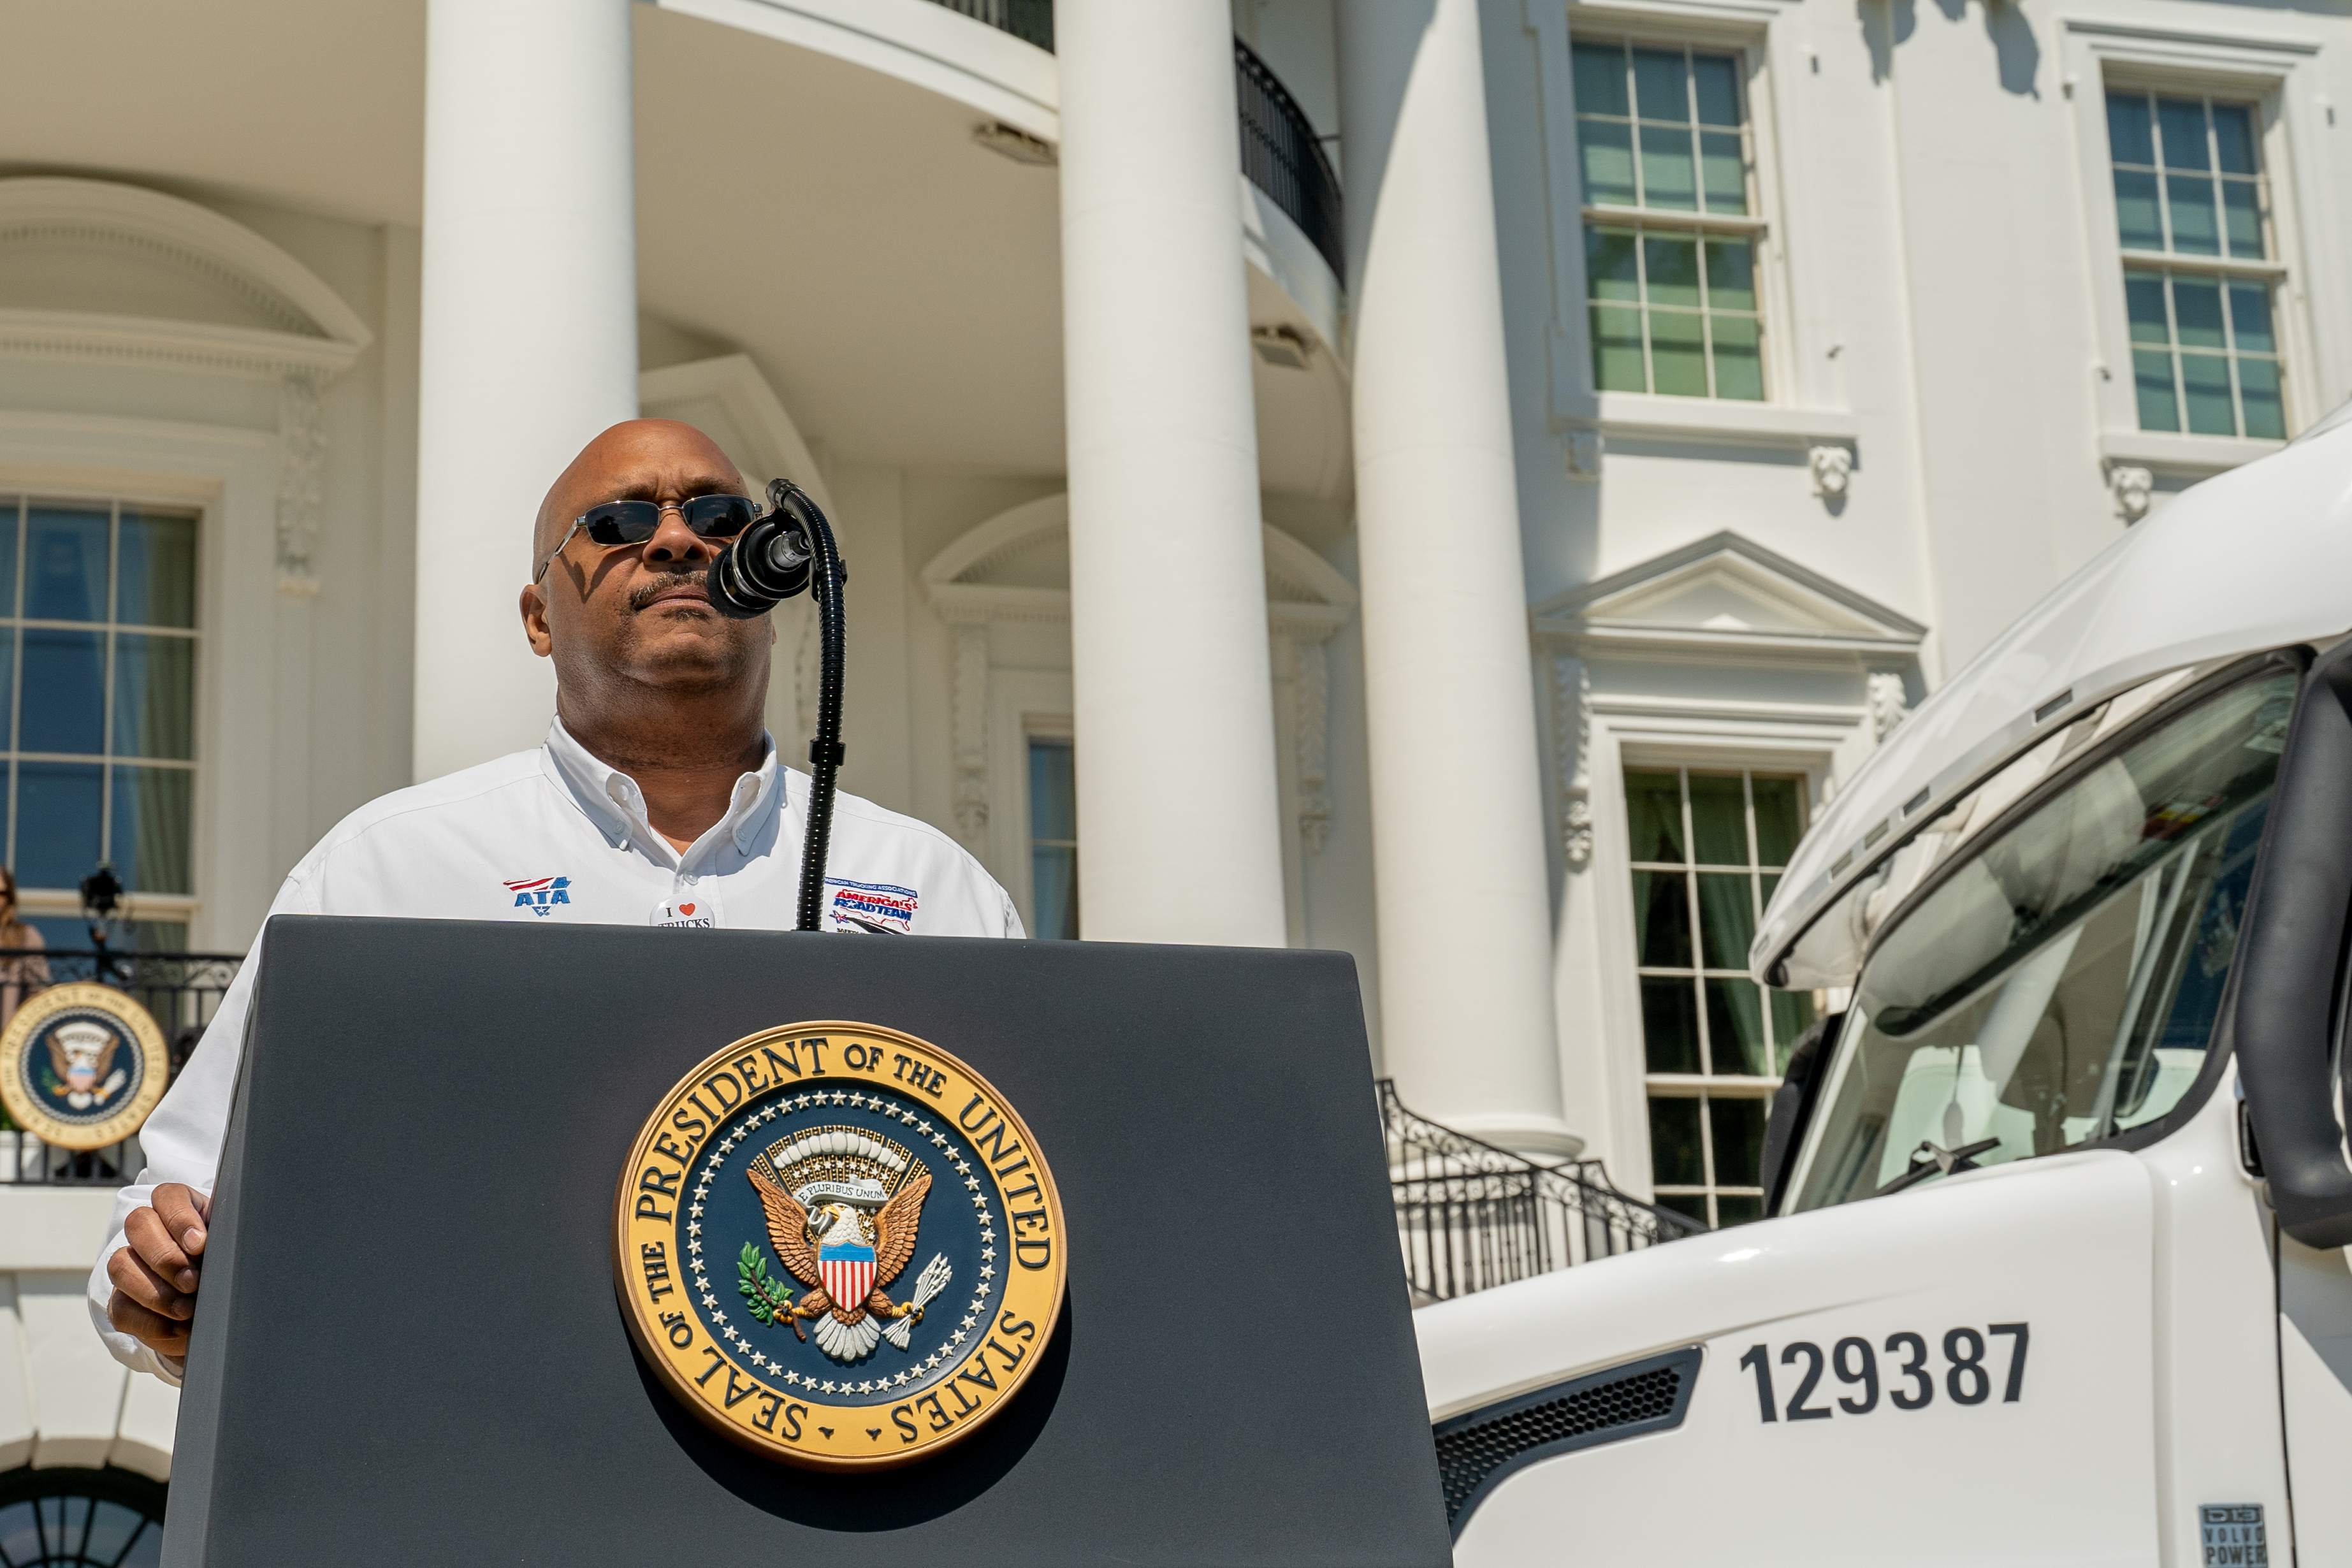 Captain Speaking at the White House